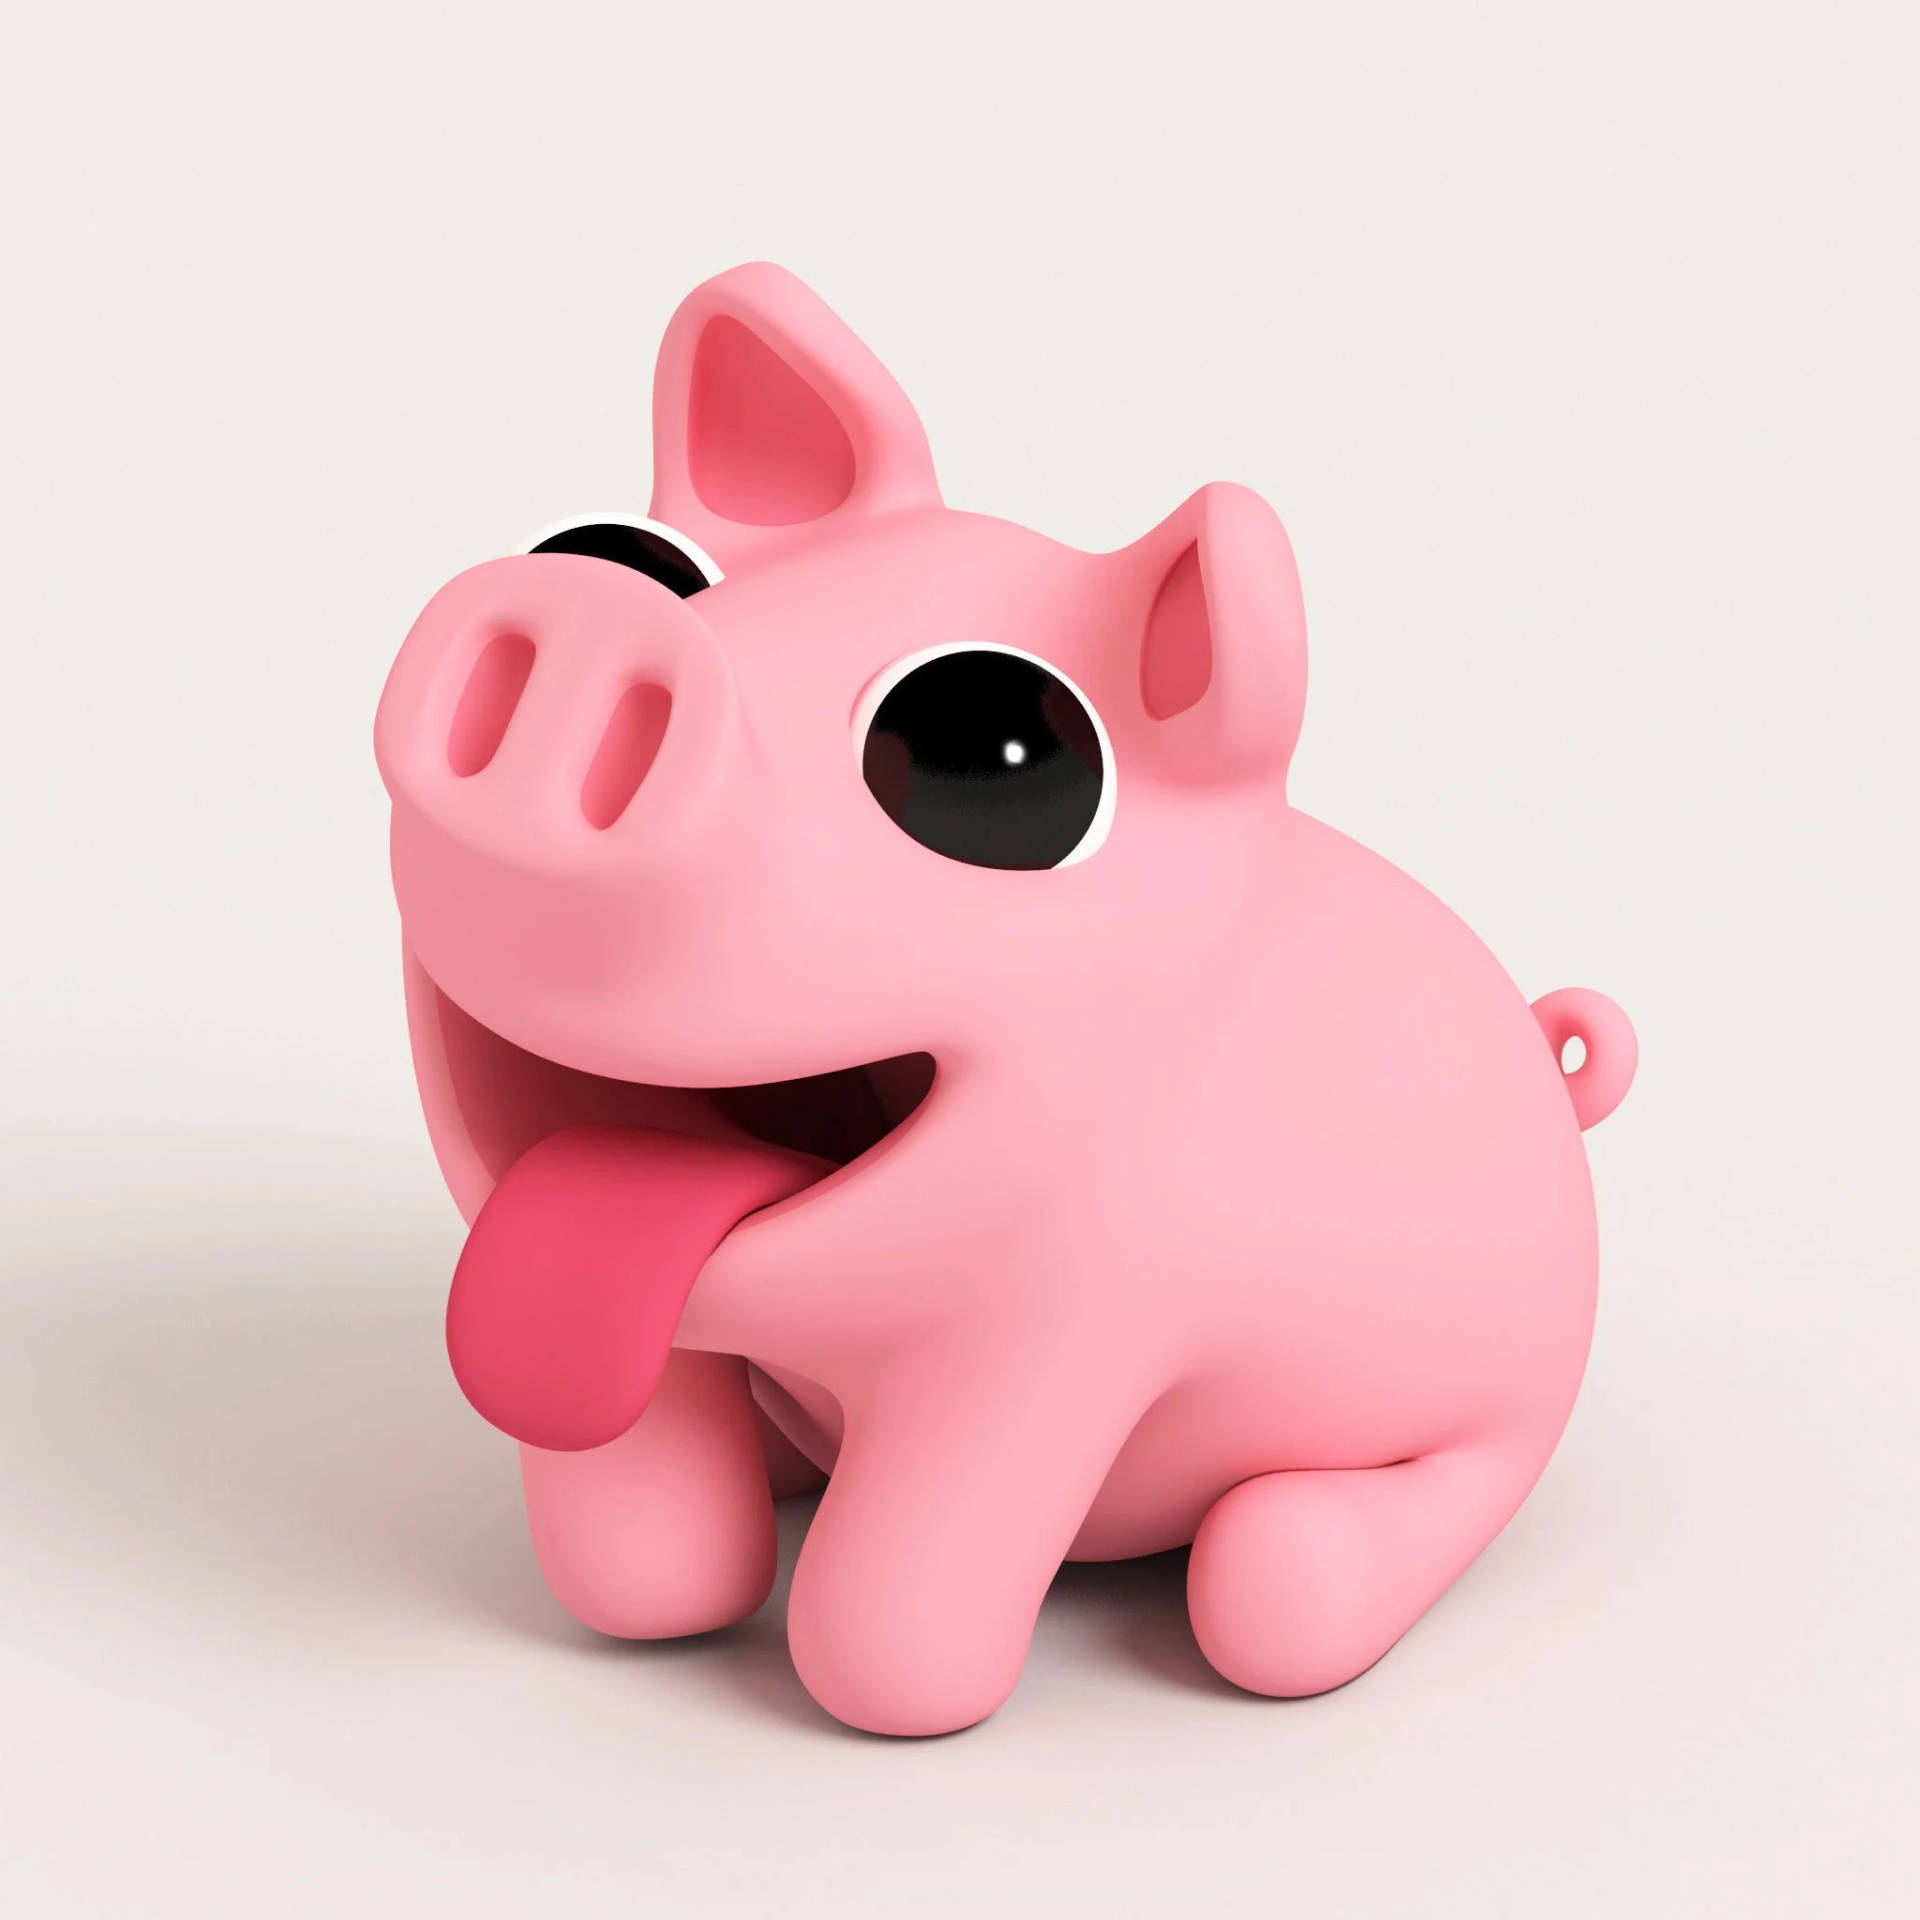 Free Cute Pig Wallpaper Downloads, [100+] Cute Pig Wallpapers for FREE |  